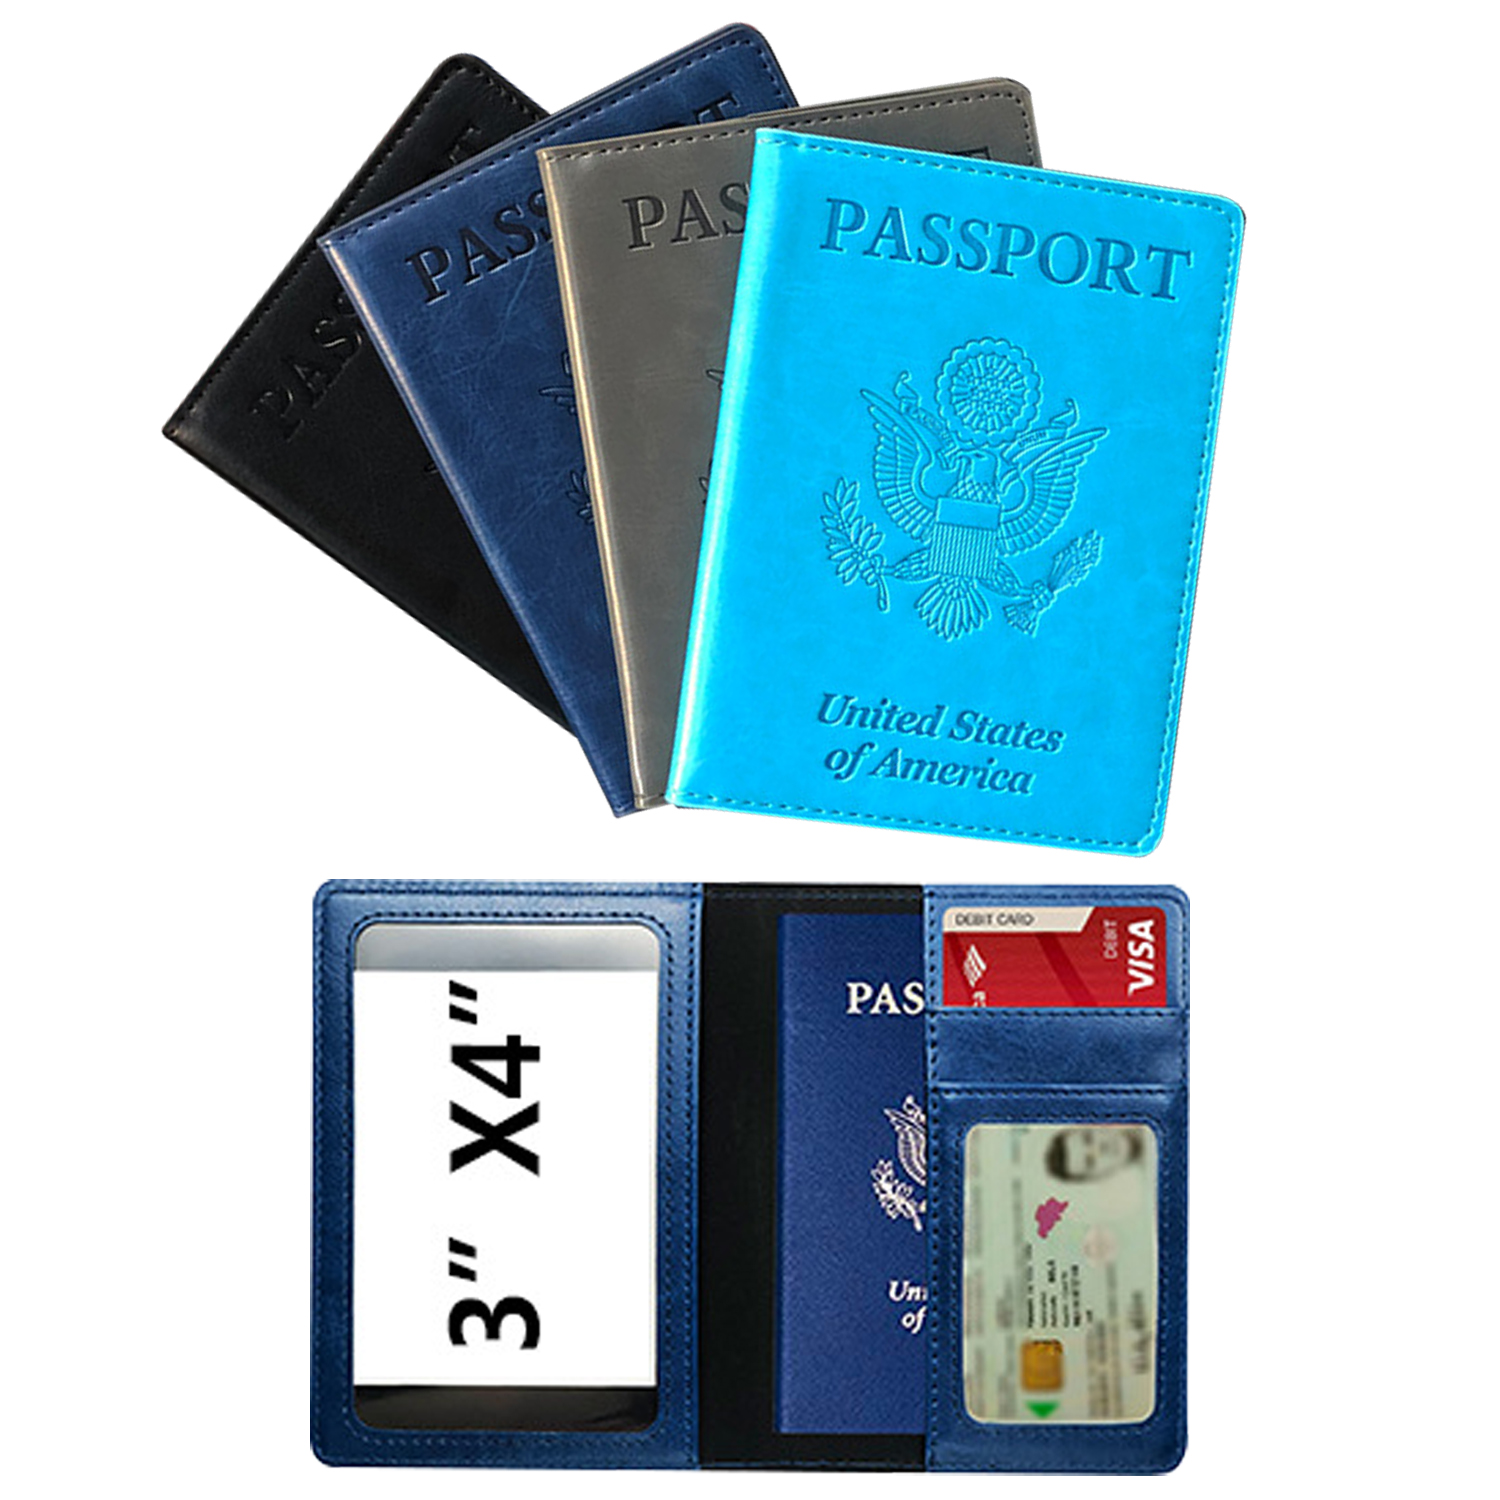 1PC Passport Holder Travel Bag Passport And Vaccine Card Holder Combo Slim Travel Accessories Passport Wallet For Unisex Leather Passport Cover Protector